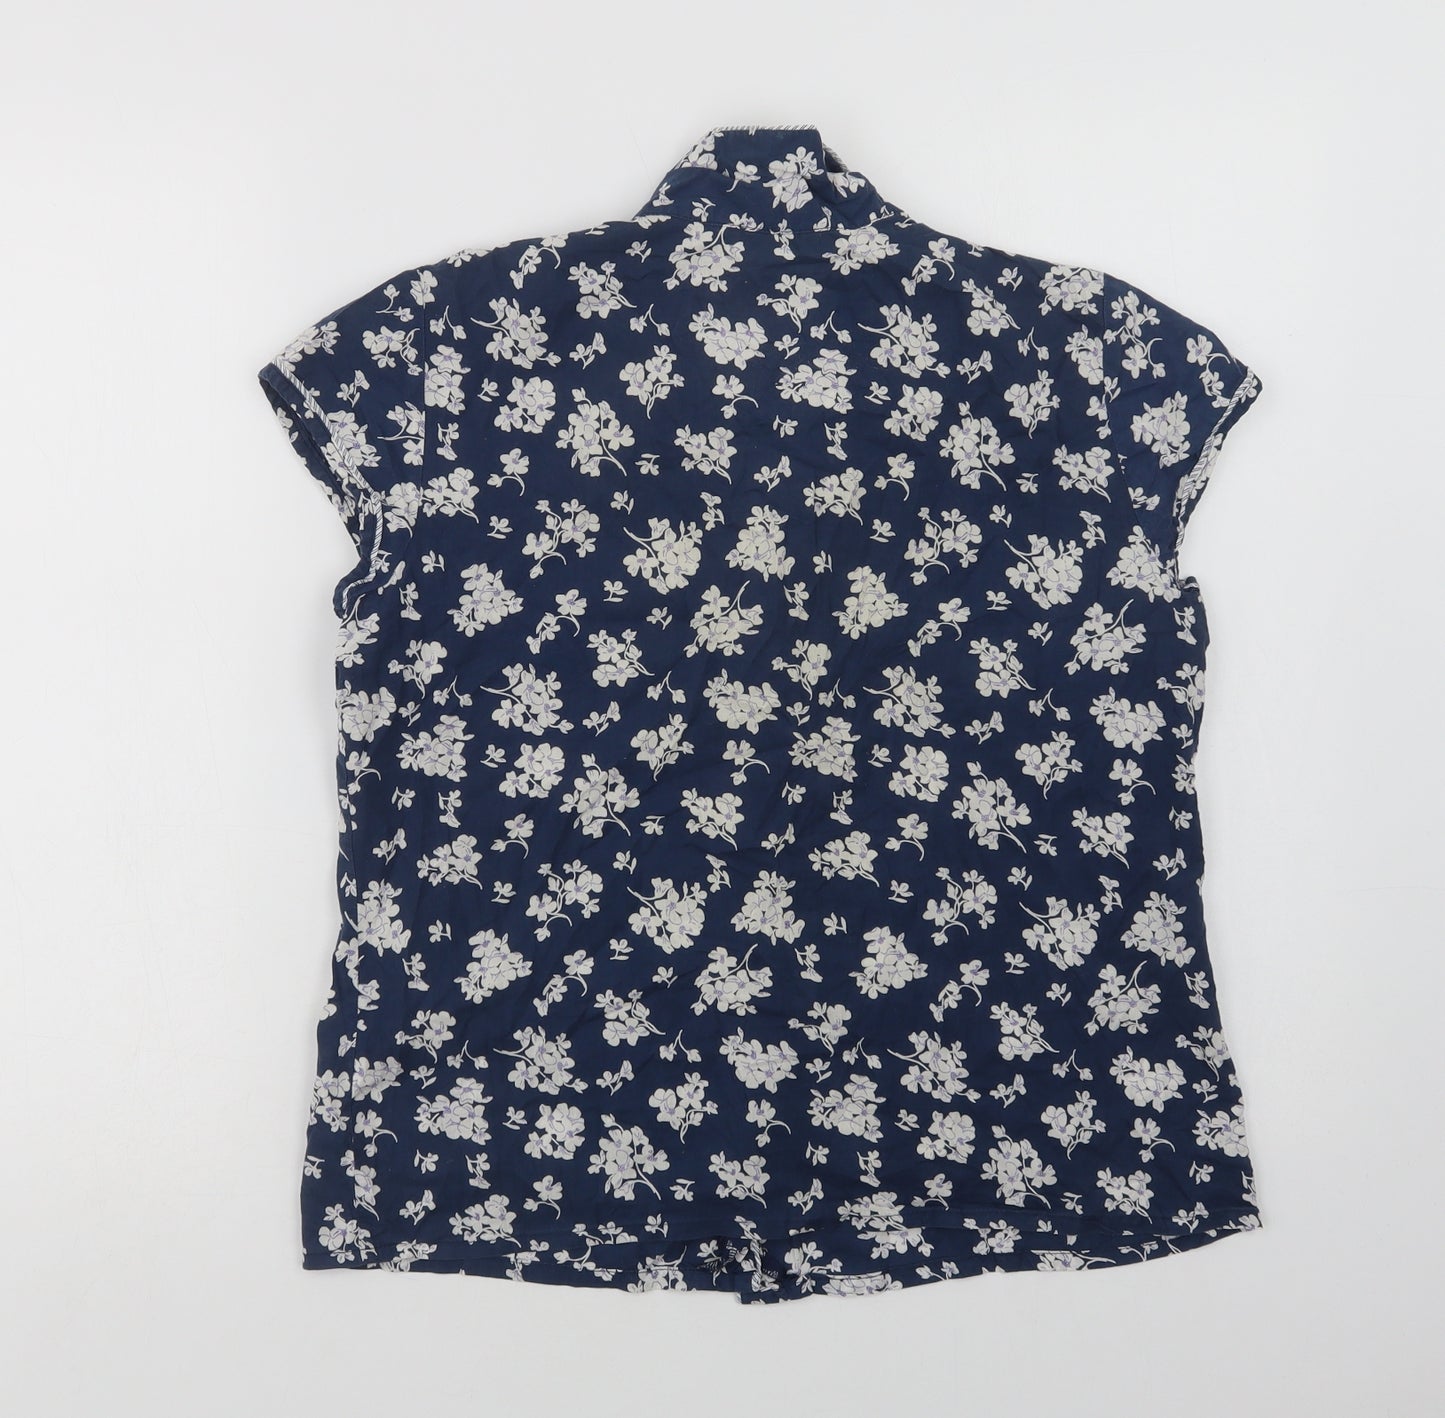 Marks and Spencer Womens Blue Floral Cotton Top Pyjama Top Size 12  Button